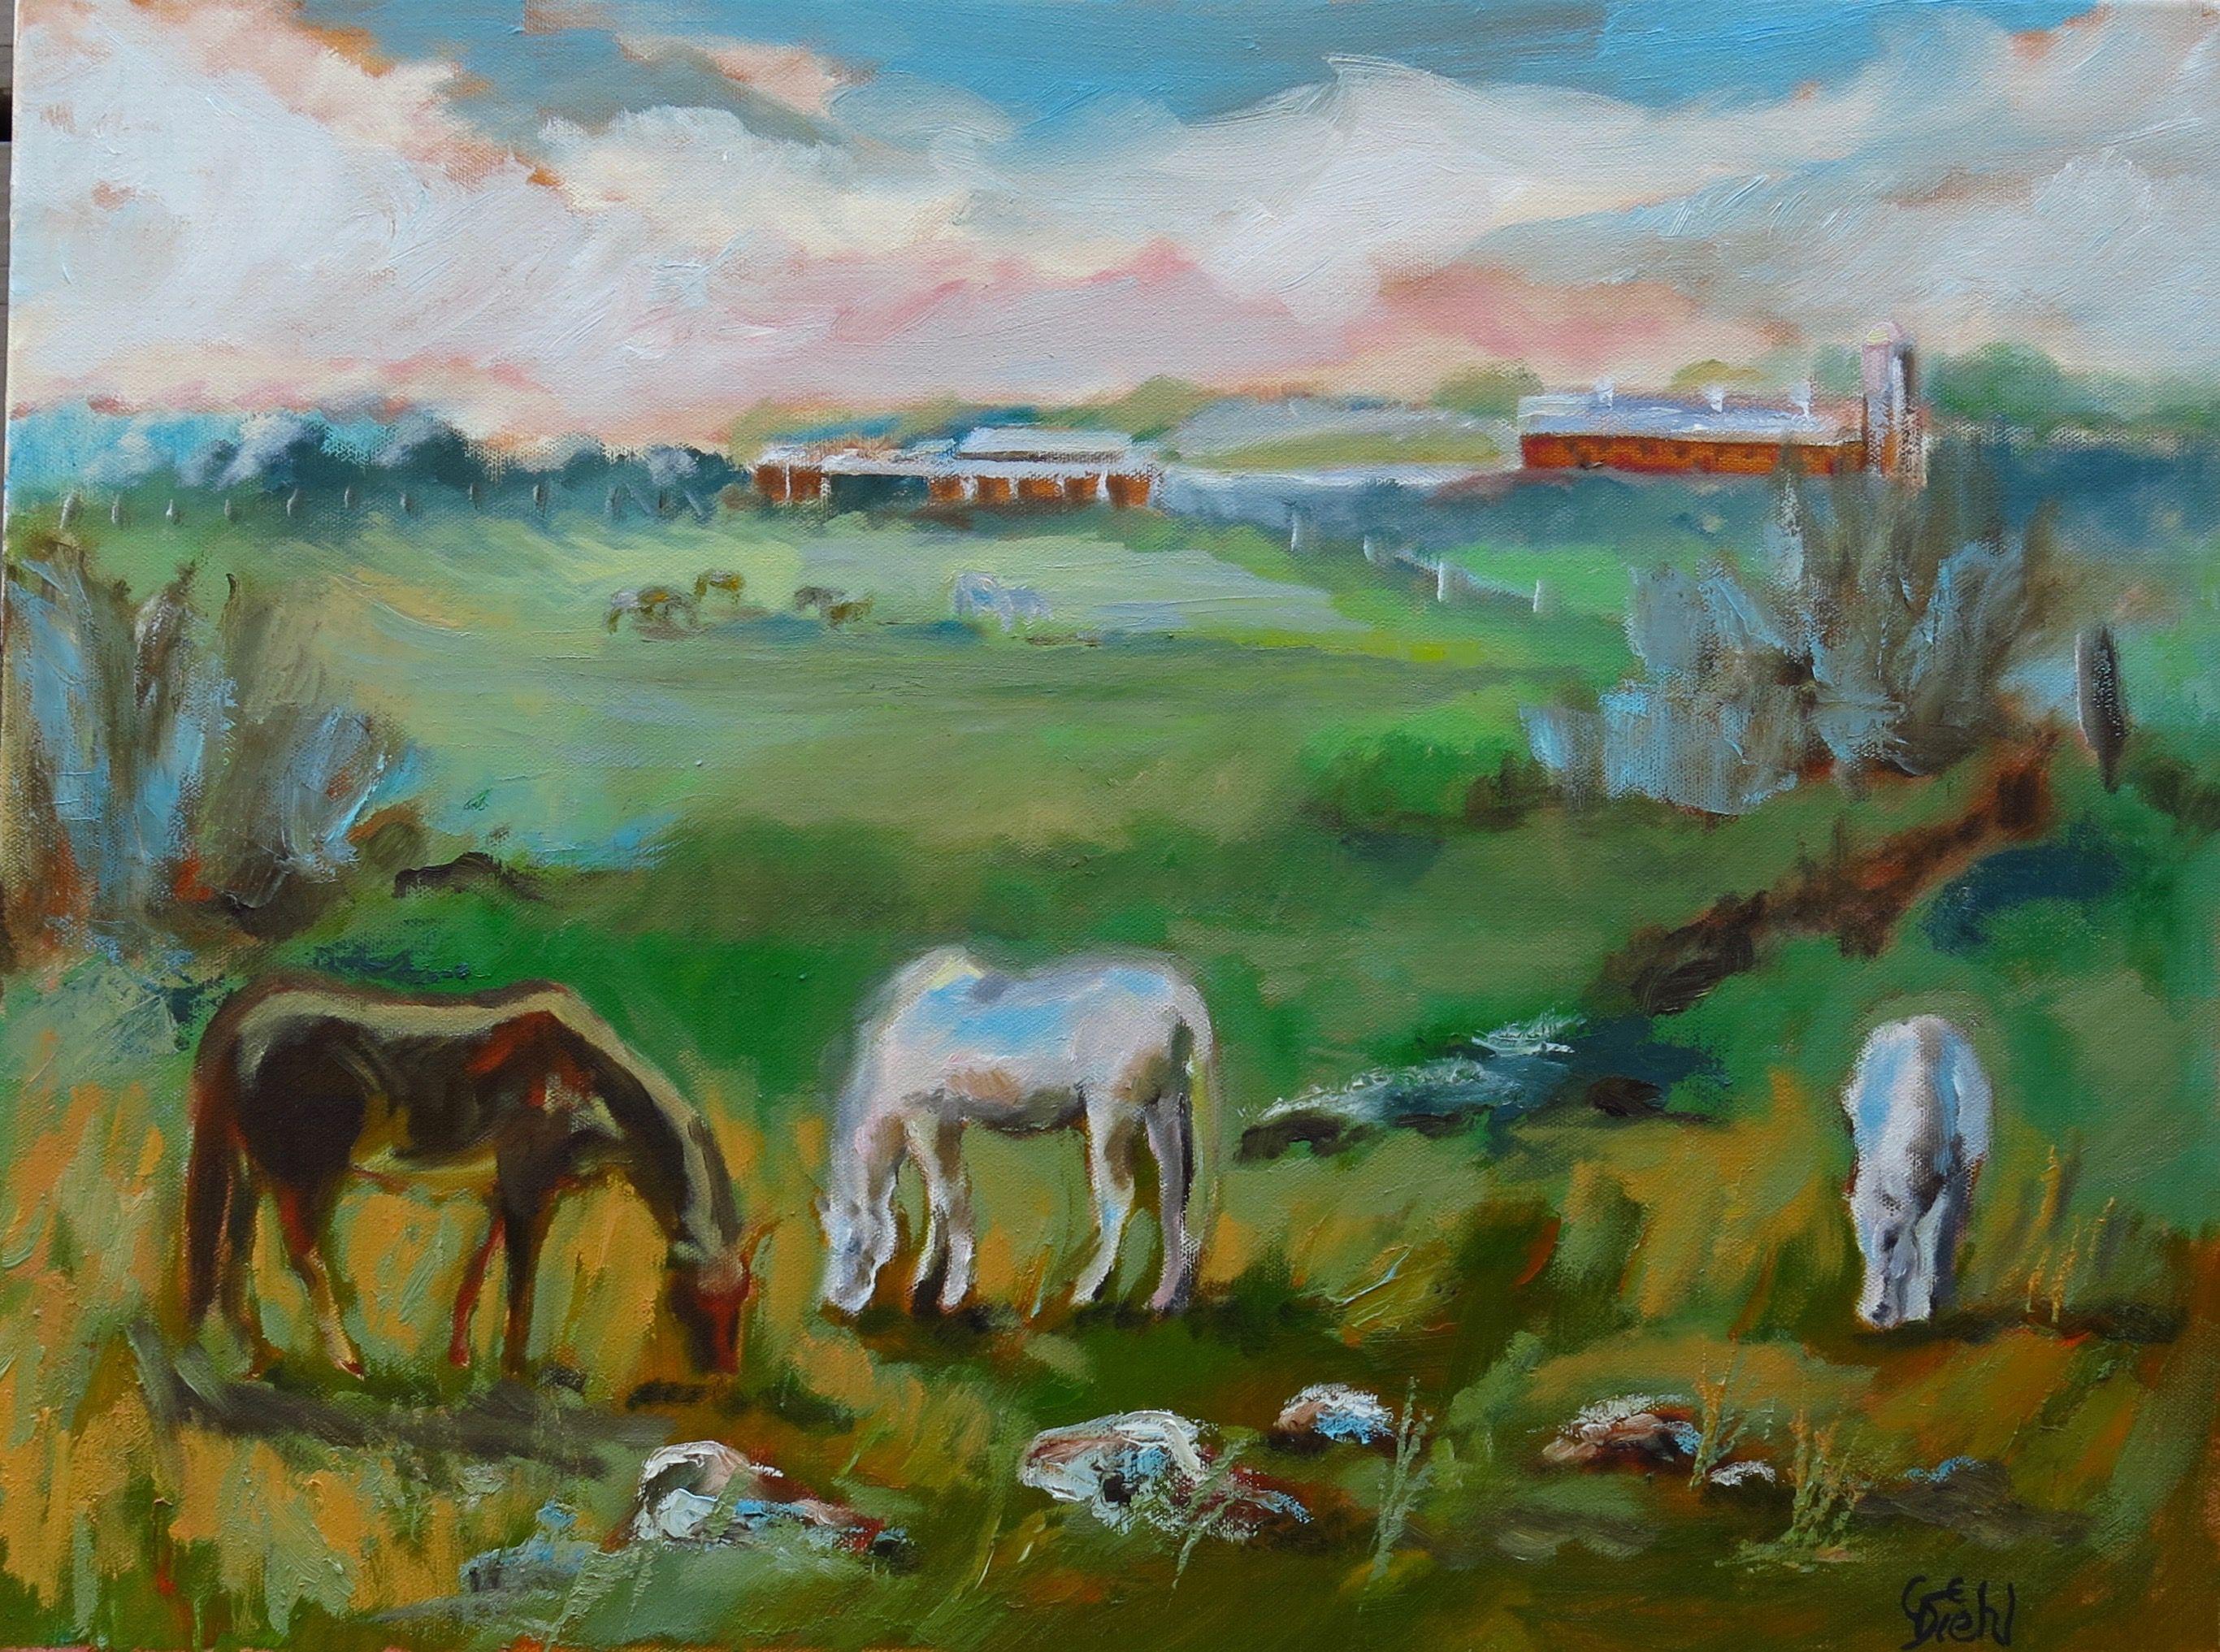 This is a horse farm close to the artist's studio. Farmland is one of the indigenous views of the area.  Light and dark colored horses are grazing in the foreground. A red barn is seen in the far distance.  This unique piece will enhance your